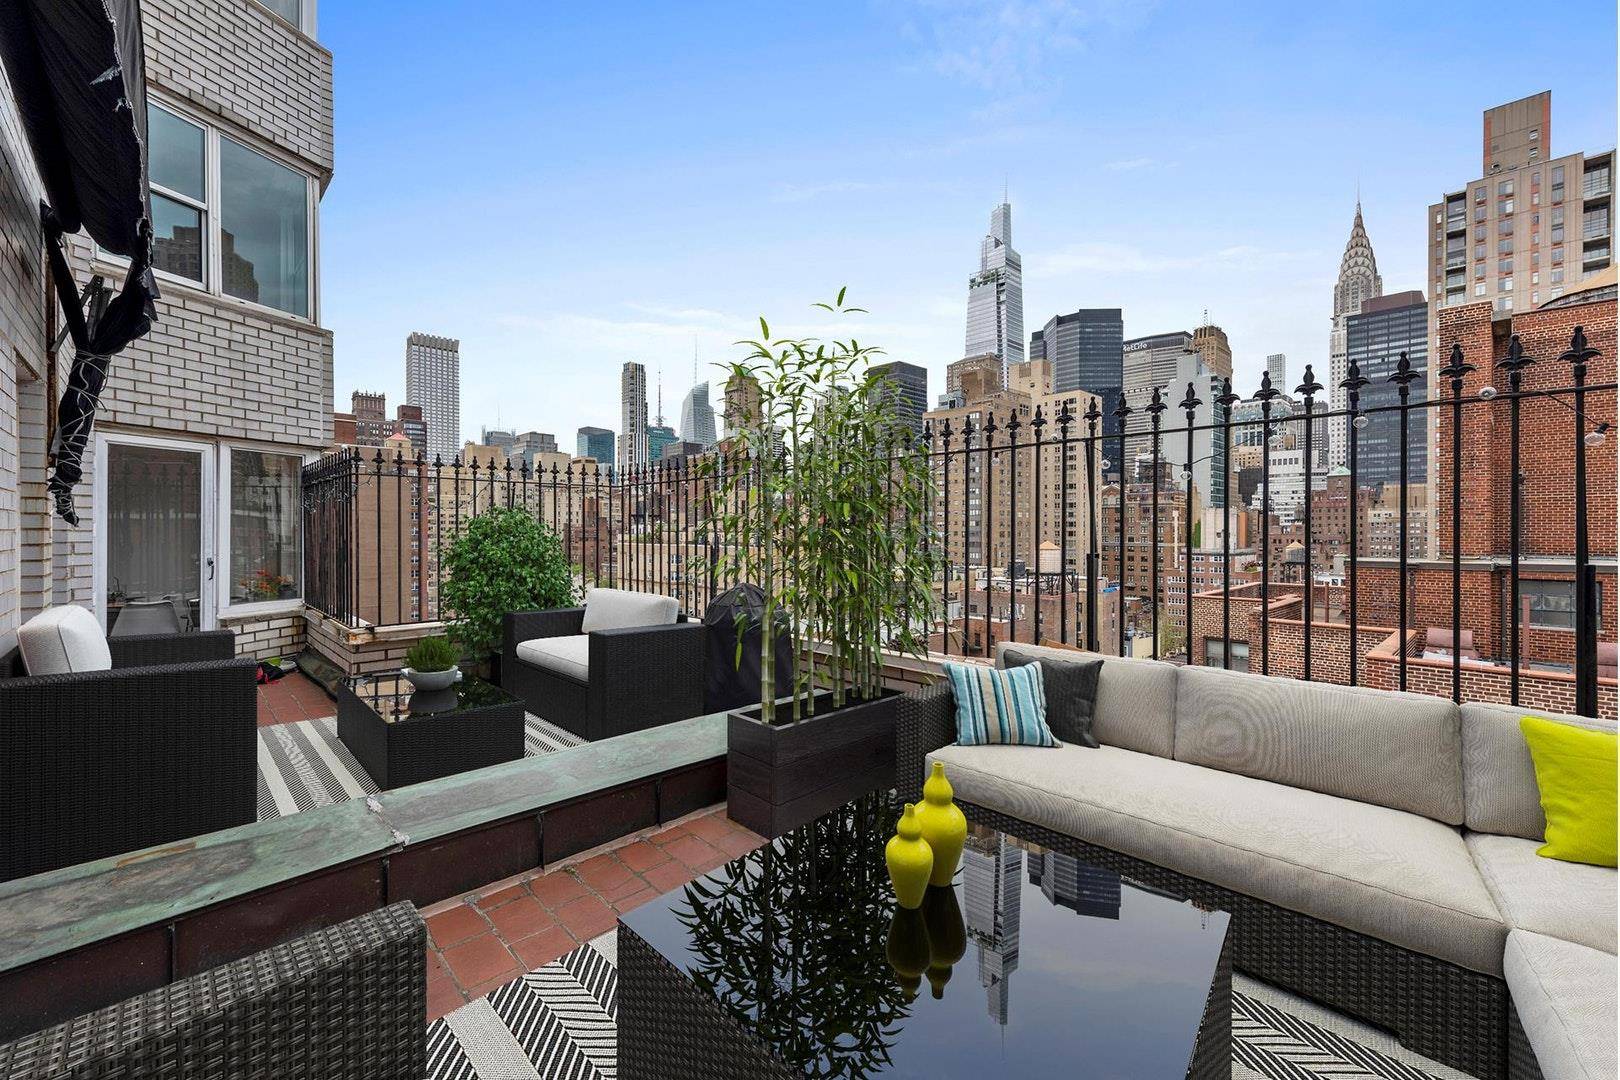 This rare high floor property with an amazing, oversized setback terrace offers drop dead views of Midtown landmarked Sky Scrapers and beyond.